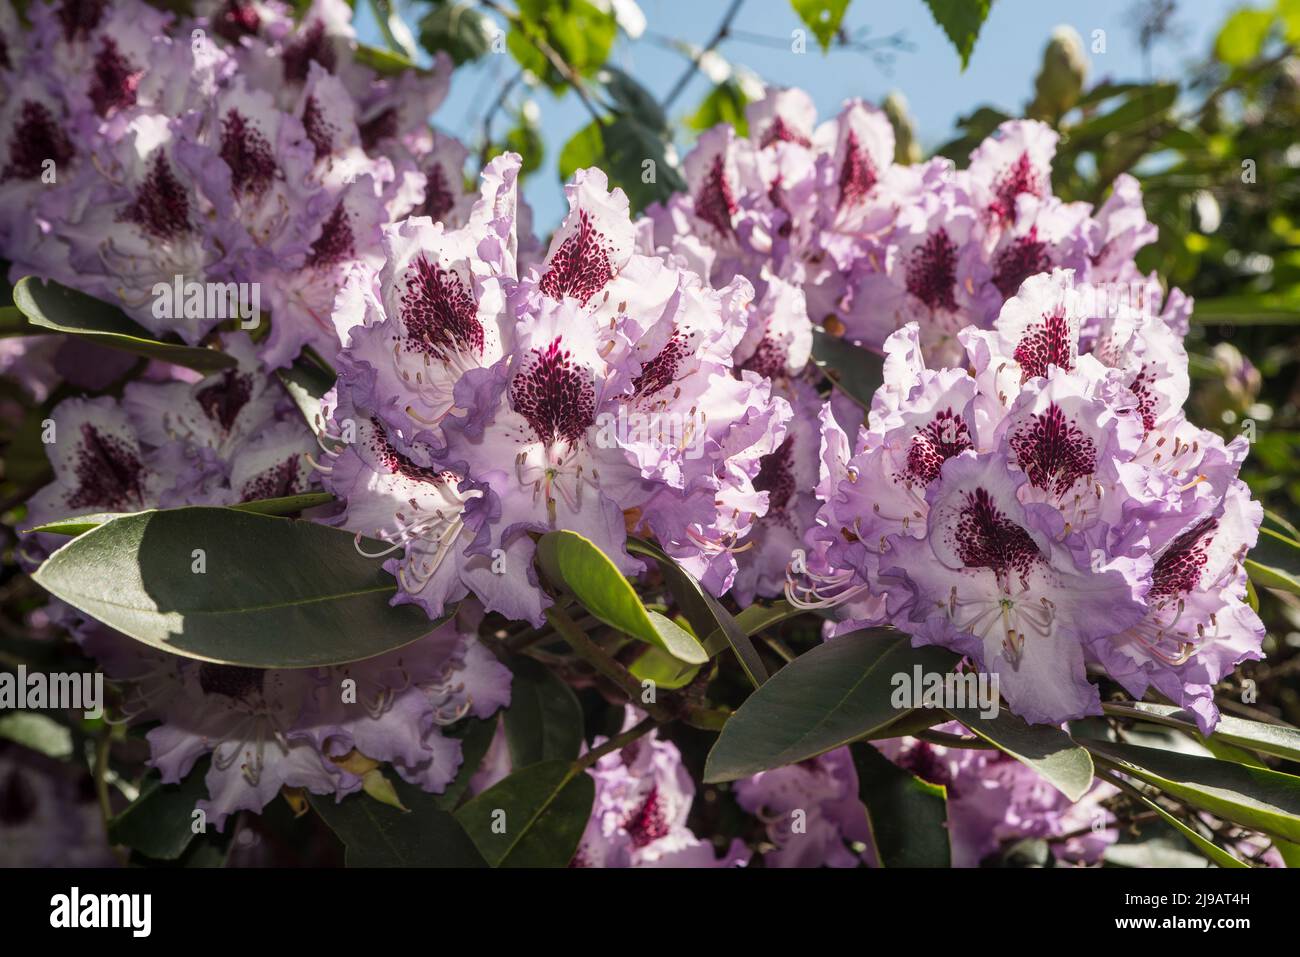 Close up of pale purple rhododendron flowers with dark burgundy markings in Summer. Stock Photo